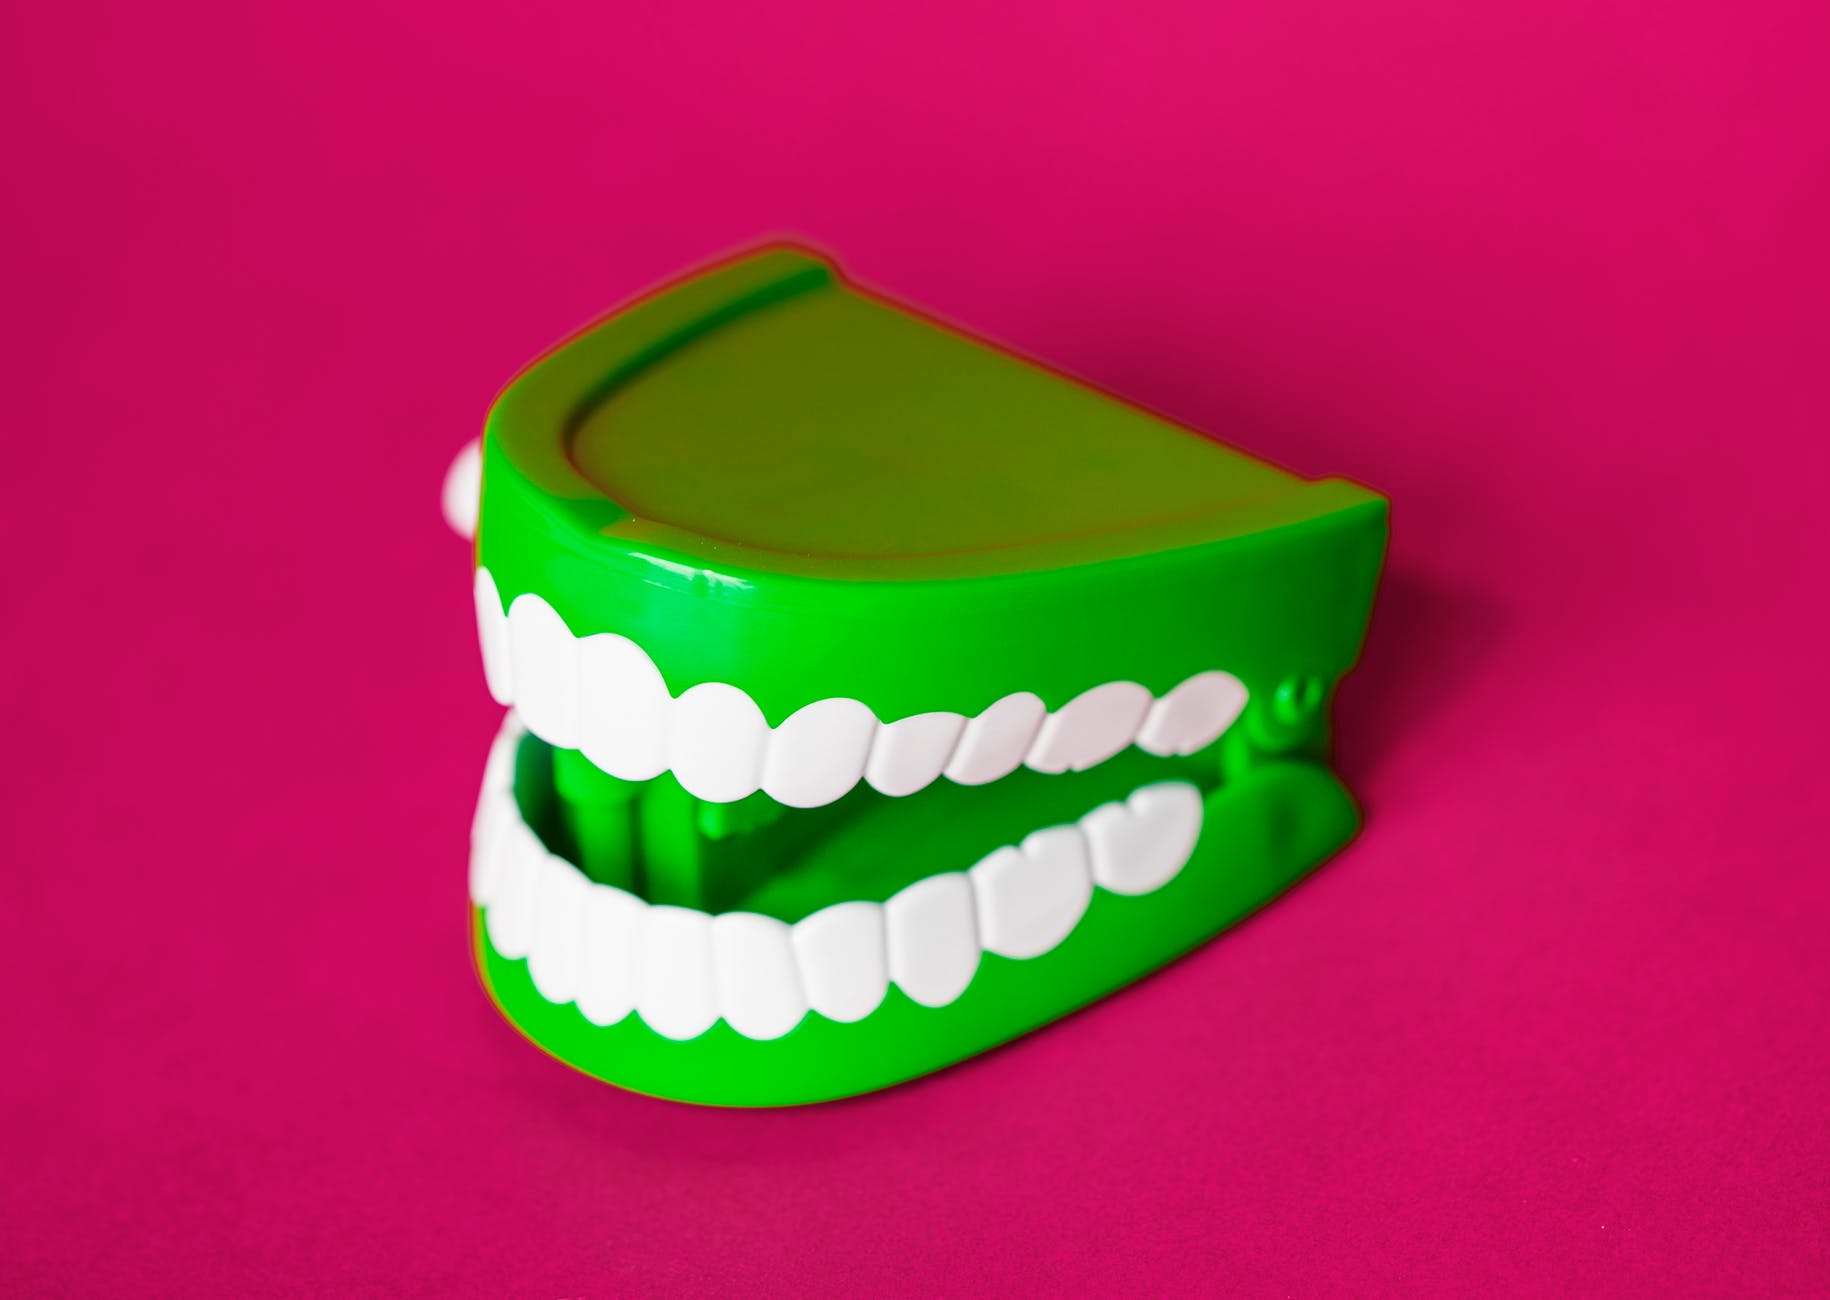 green and white denture toy